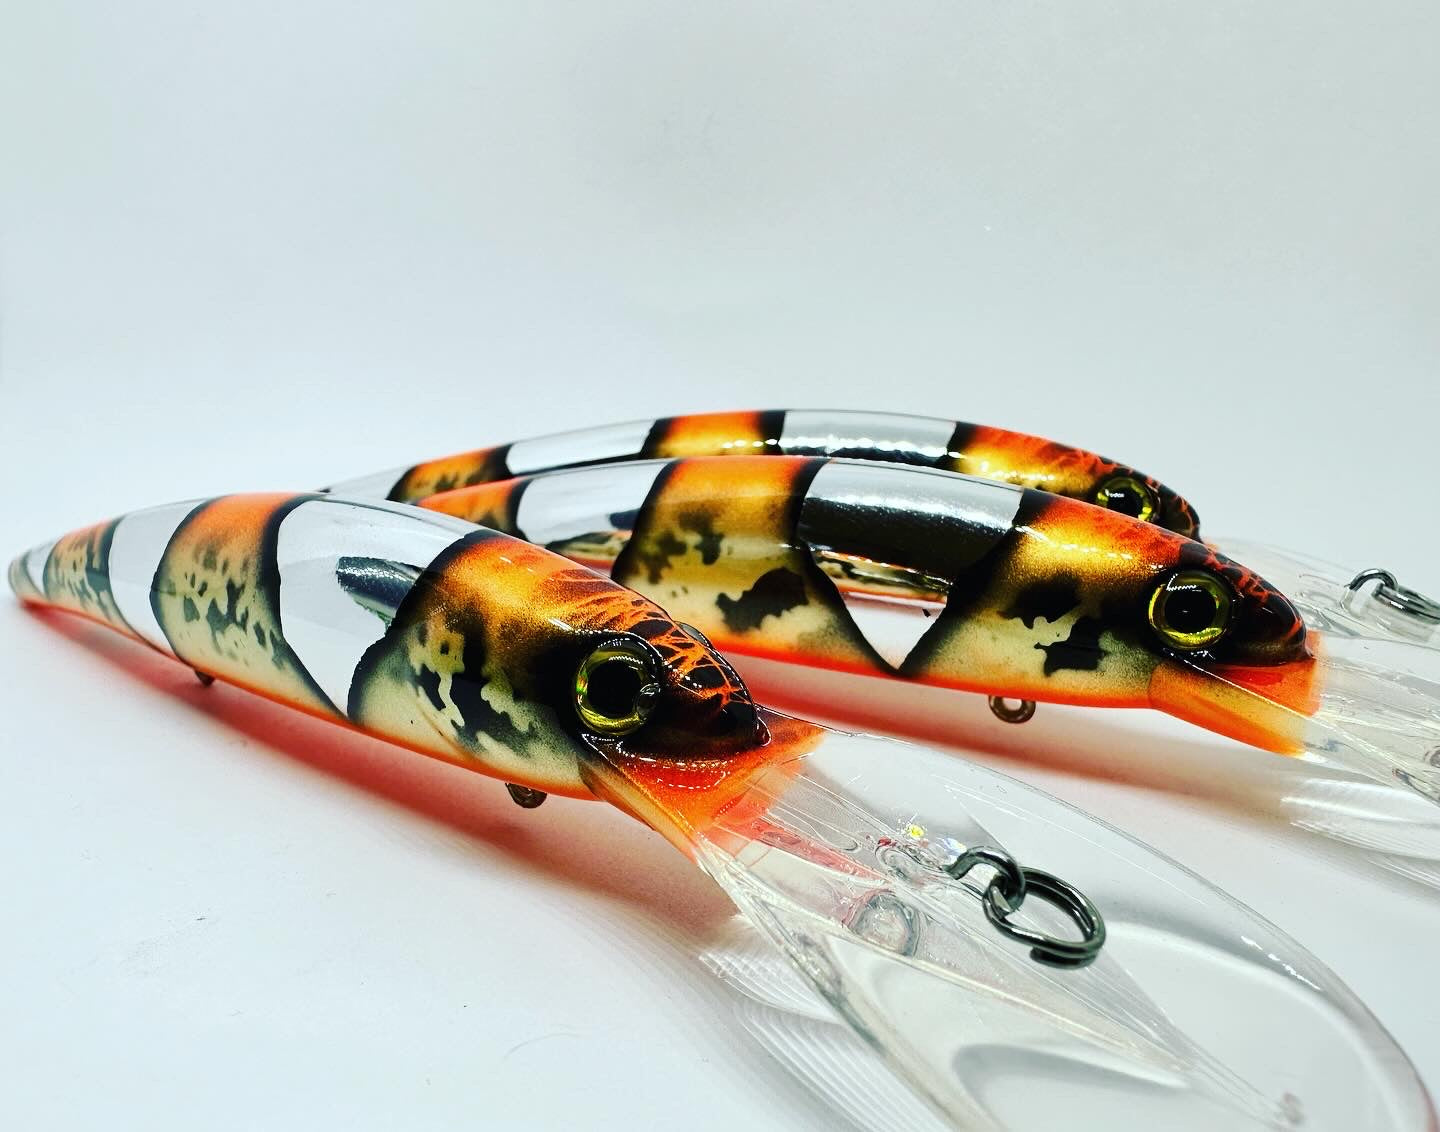 Custom Bandit Crankbait - Creamsicle by Vertical Jigs and Lures